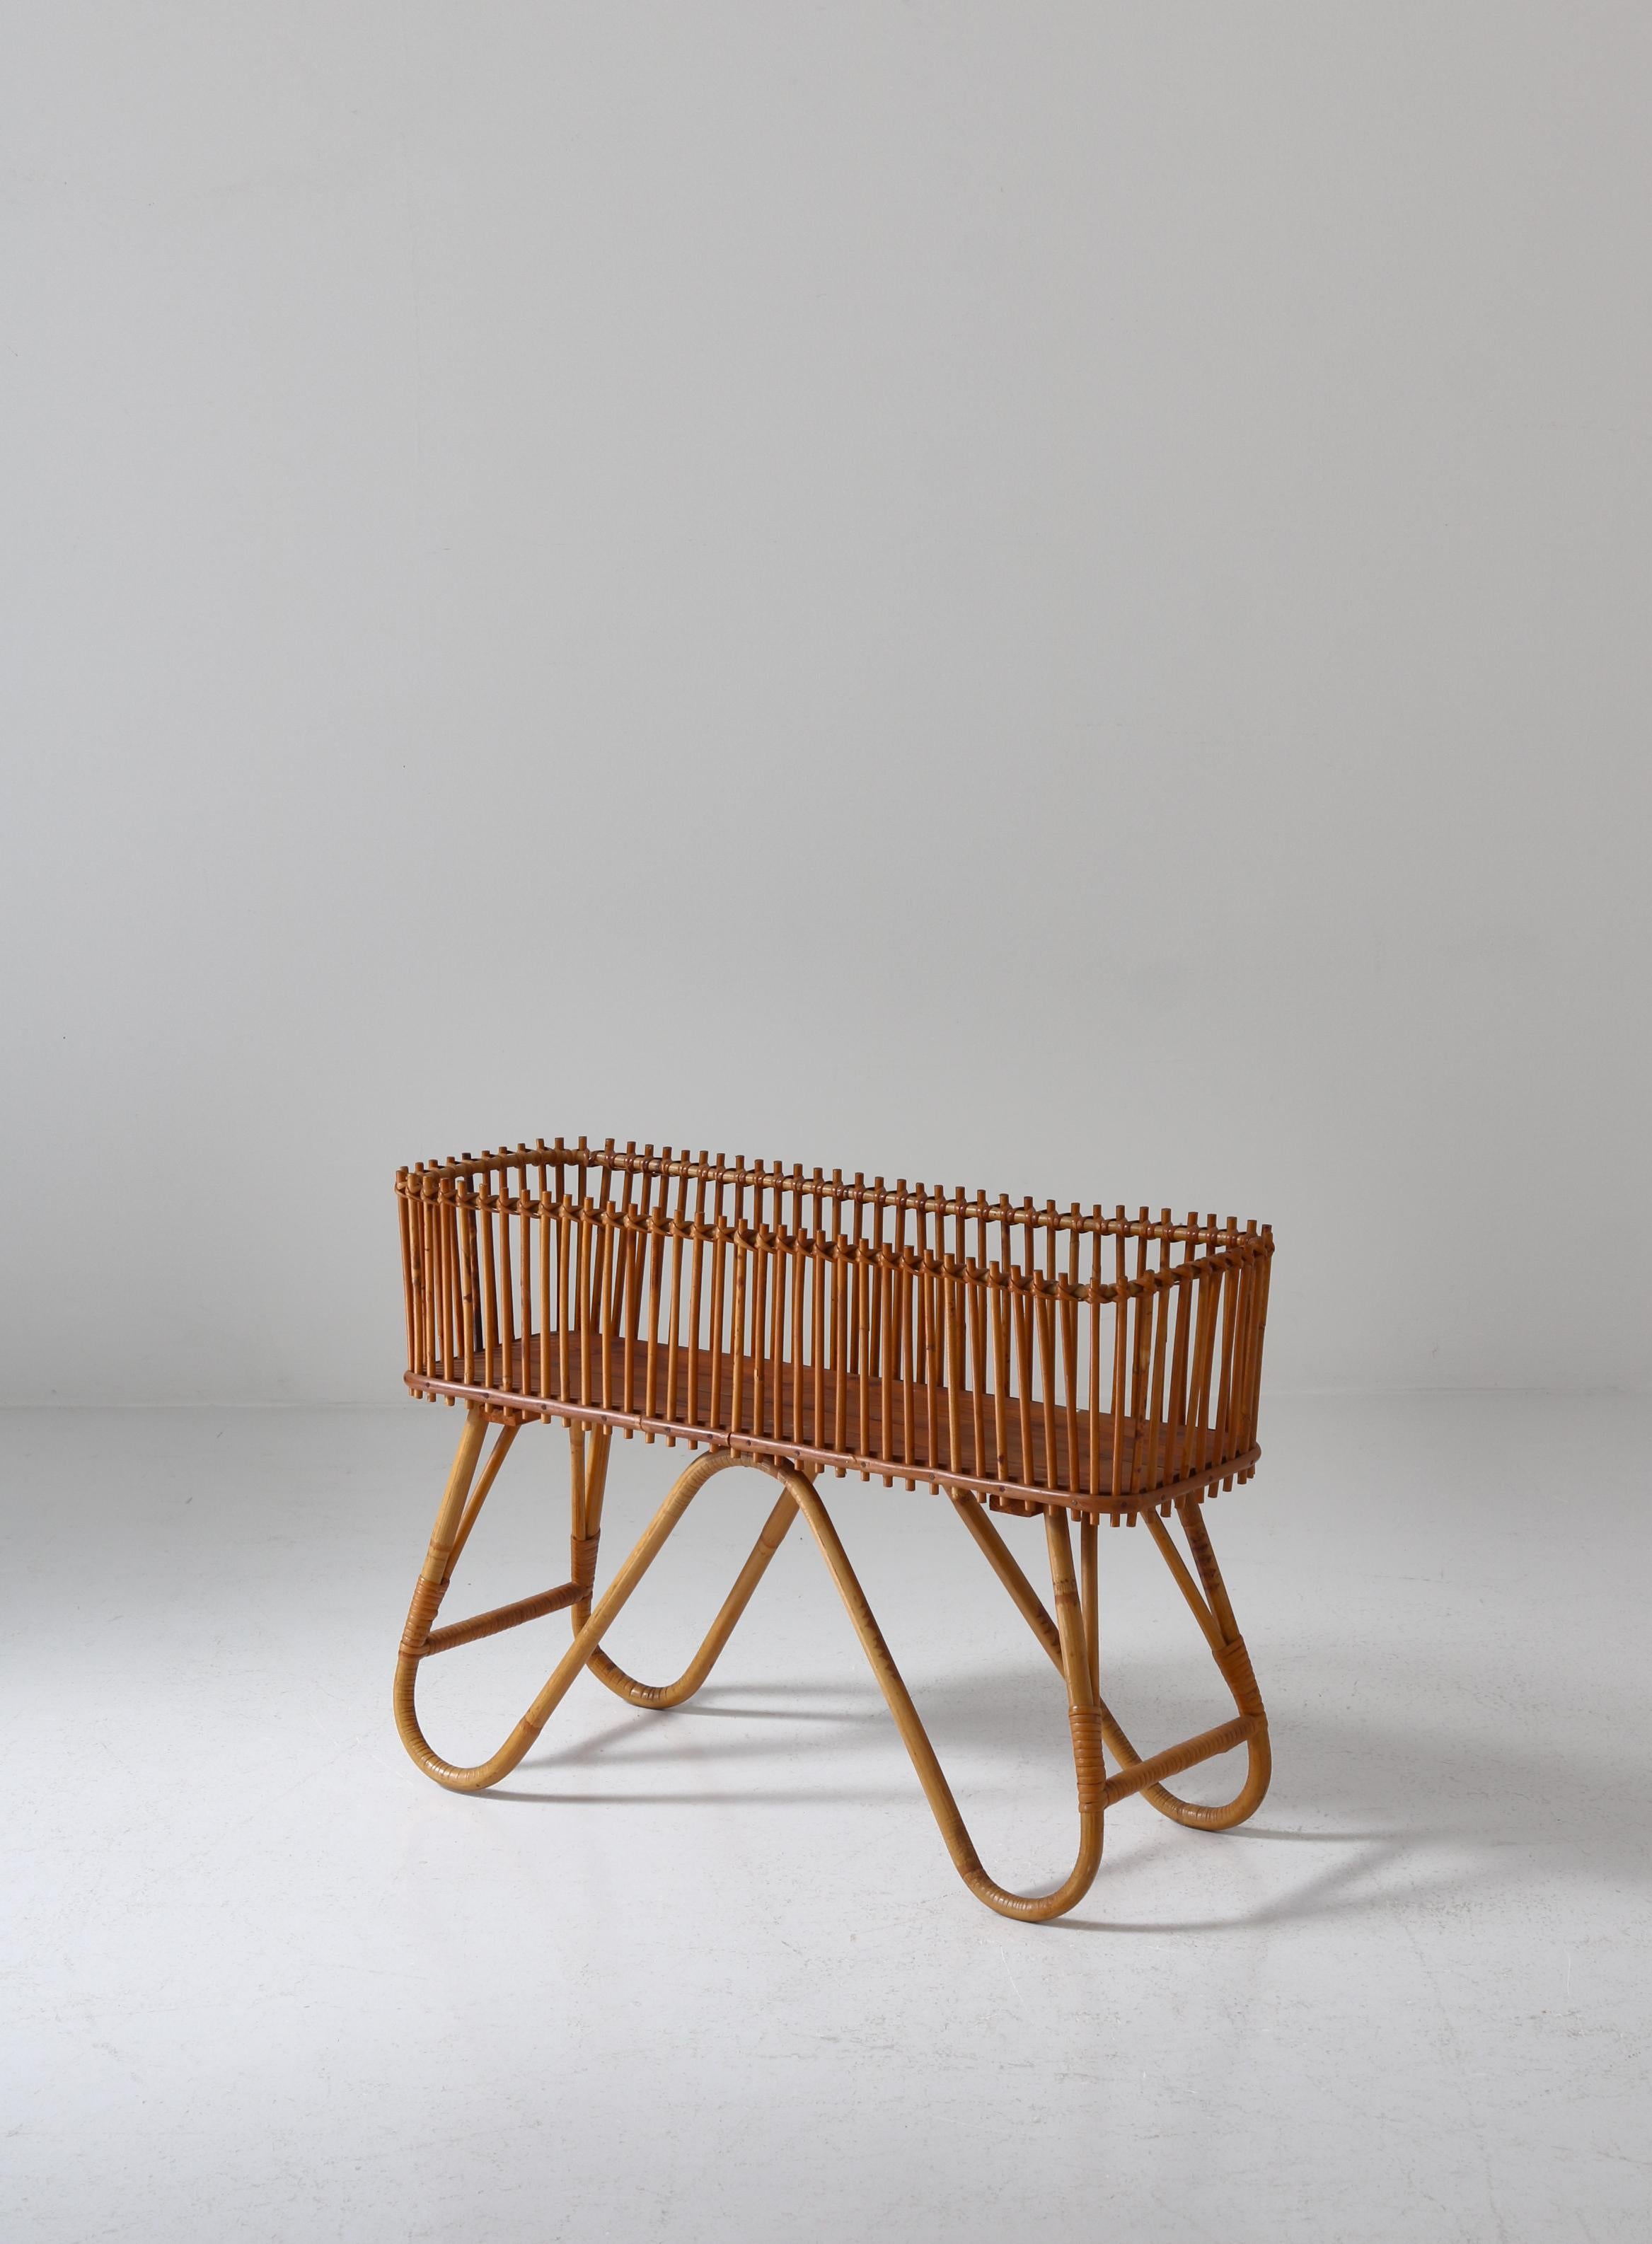 1940 caned cradle